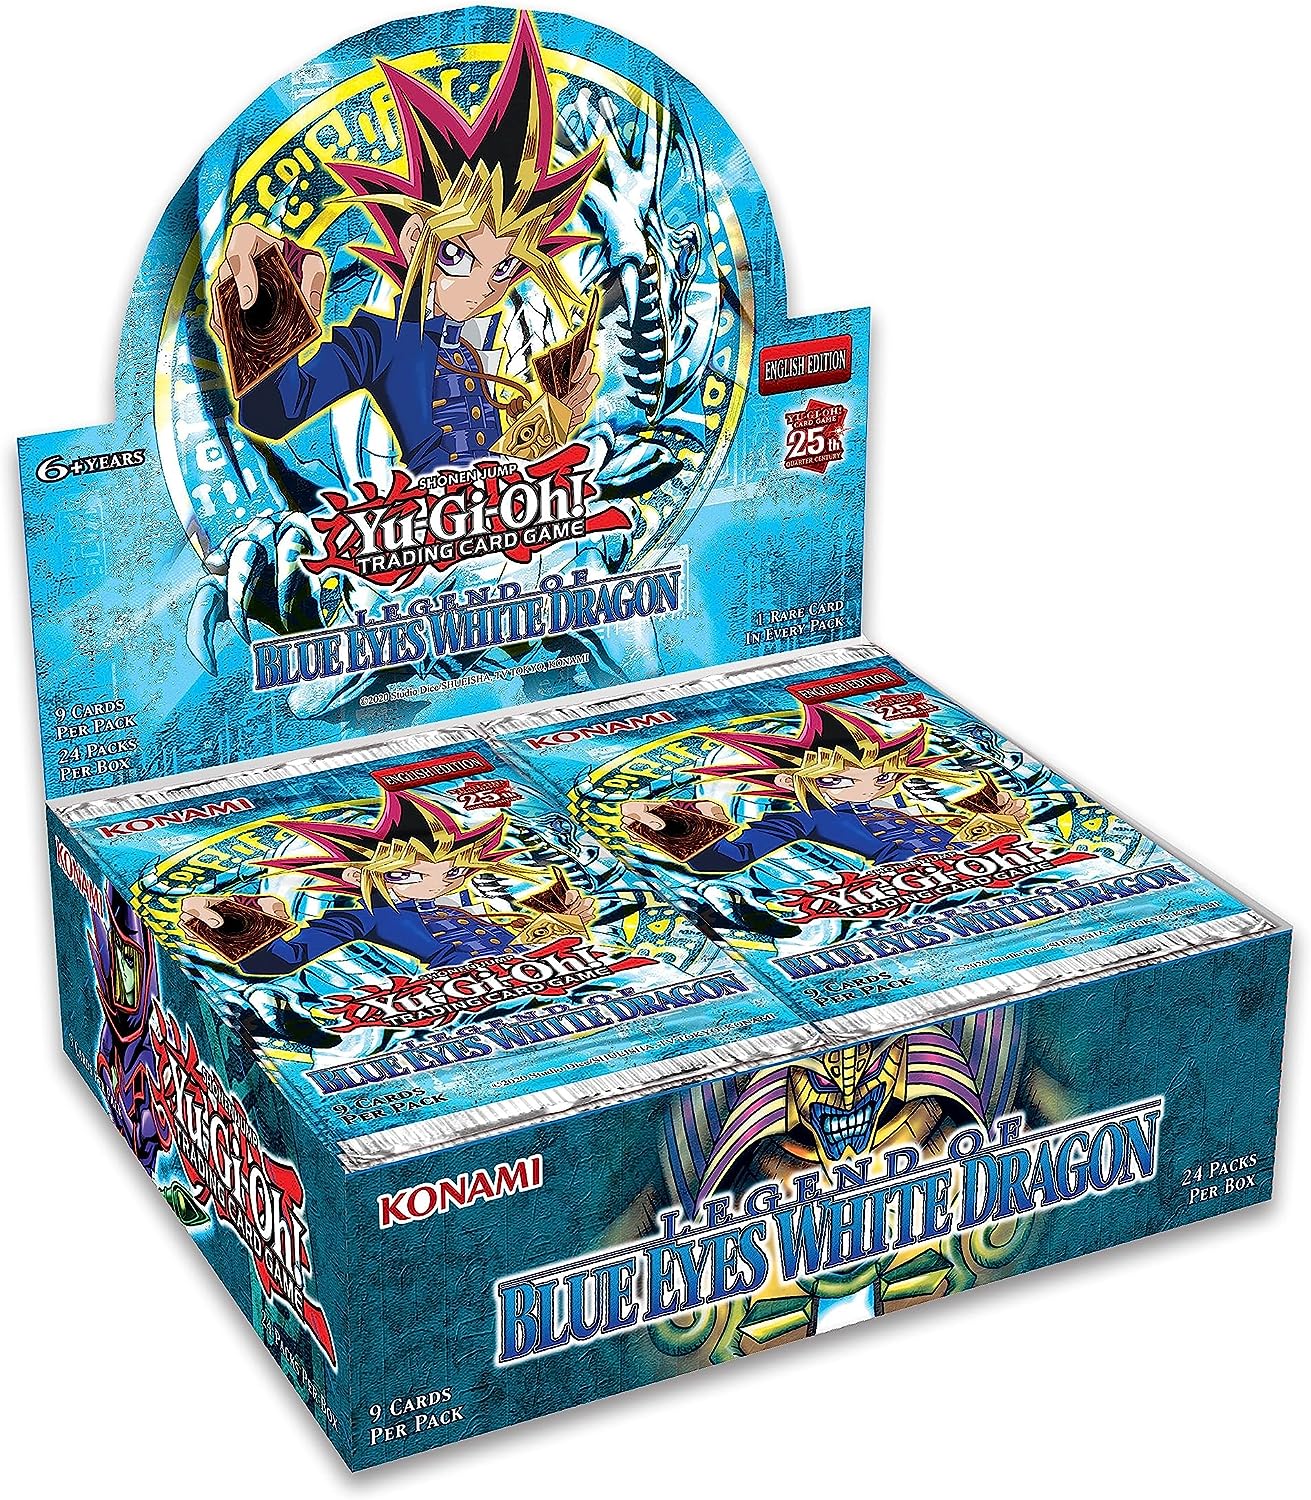 Looking for the best Yu-Gi-Oh! booster box? Check out our review of the Yu-Gi-Oh! TCG: Blue Eyes White Dragon Booster Box.